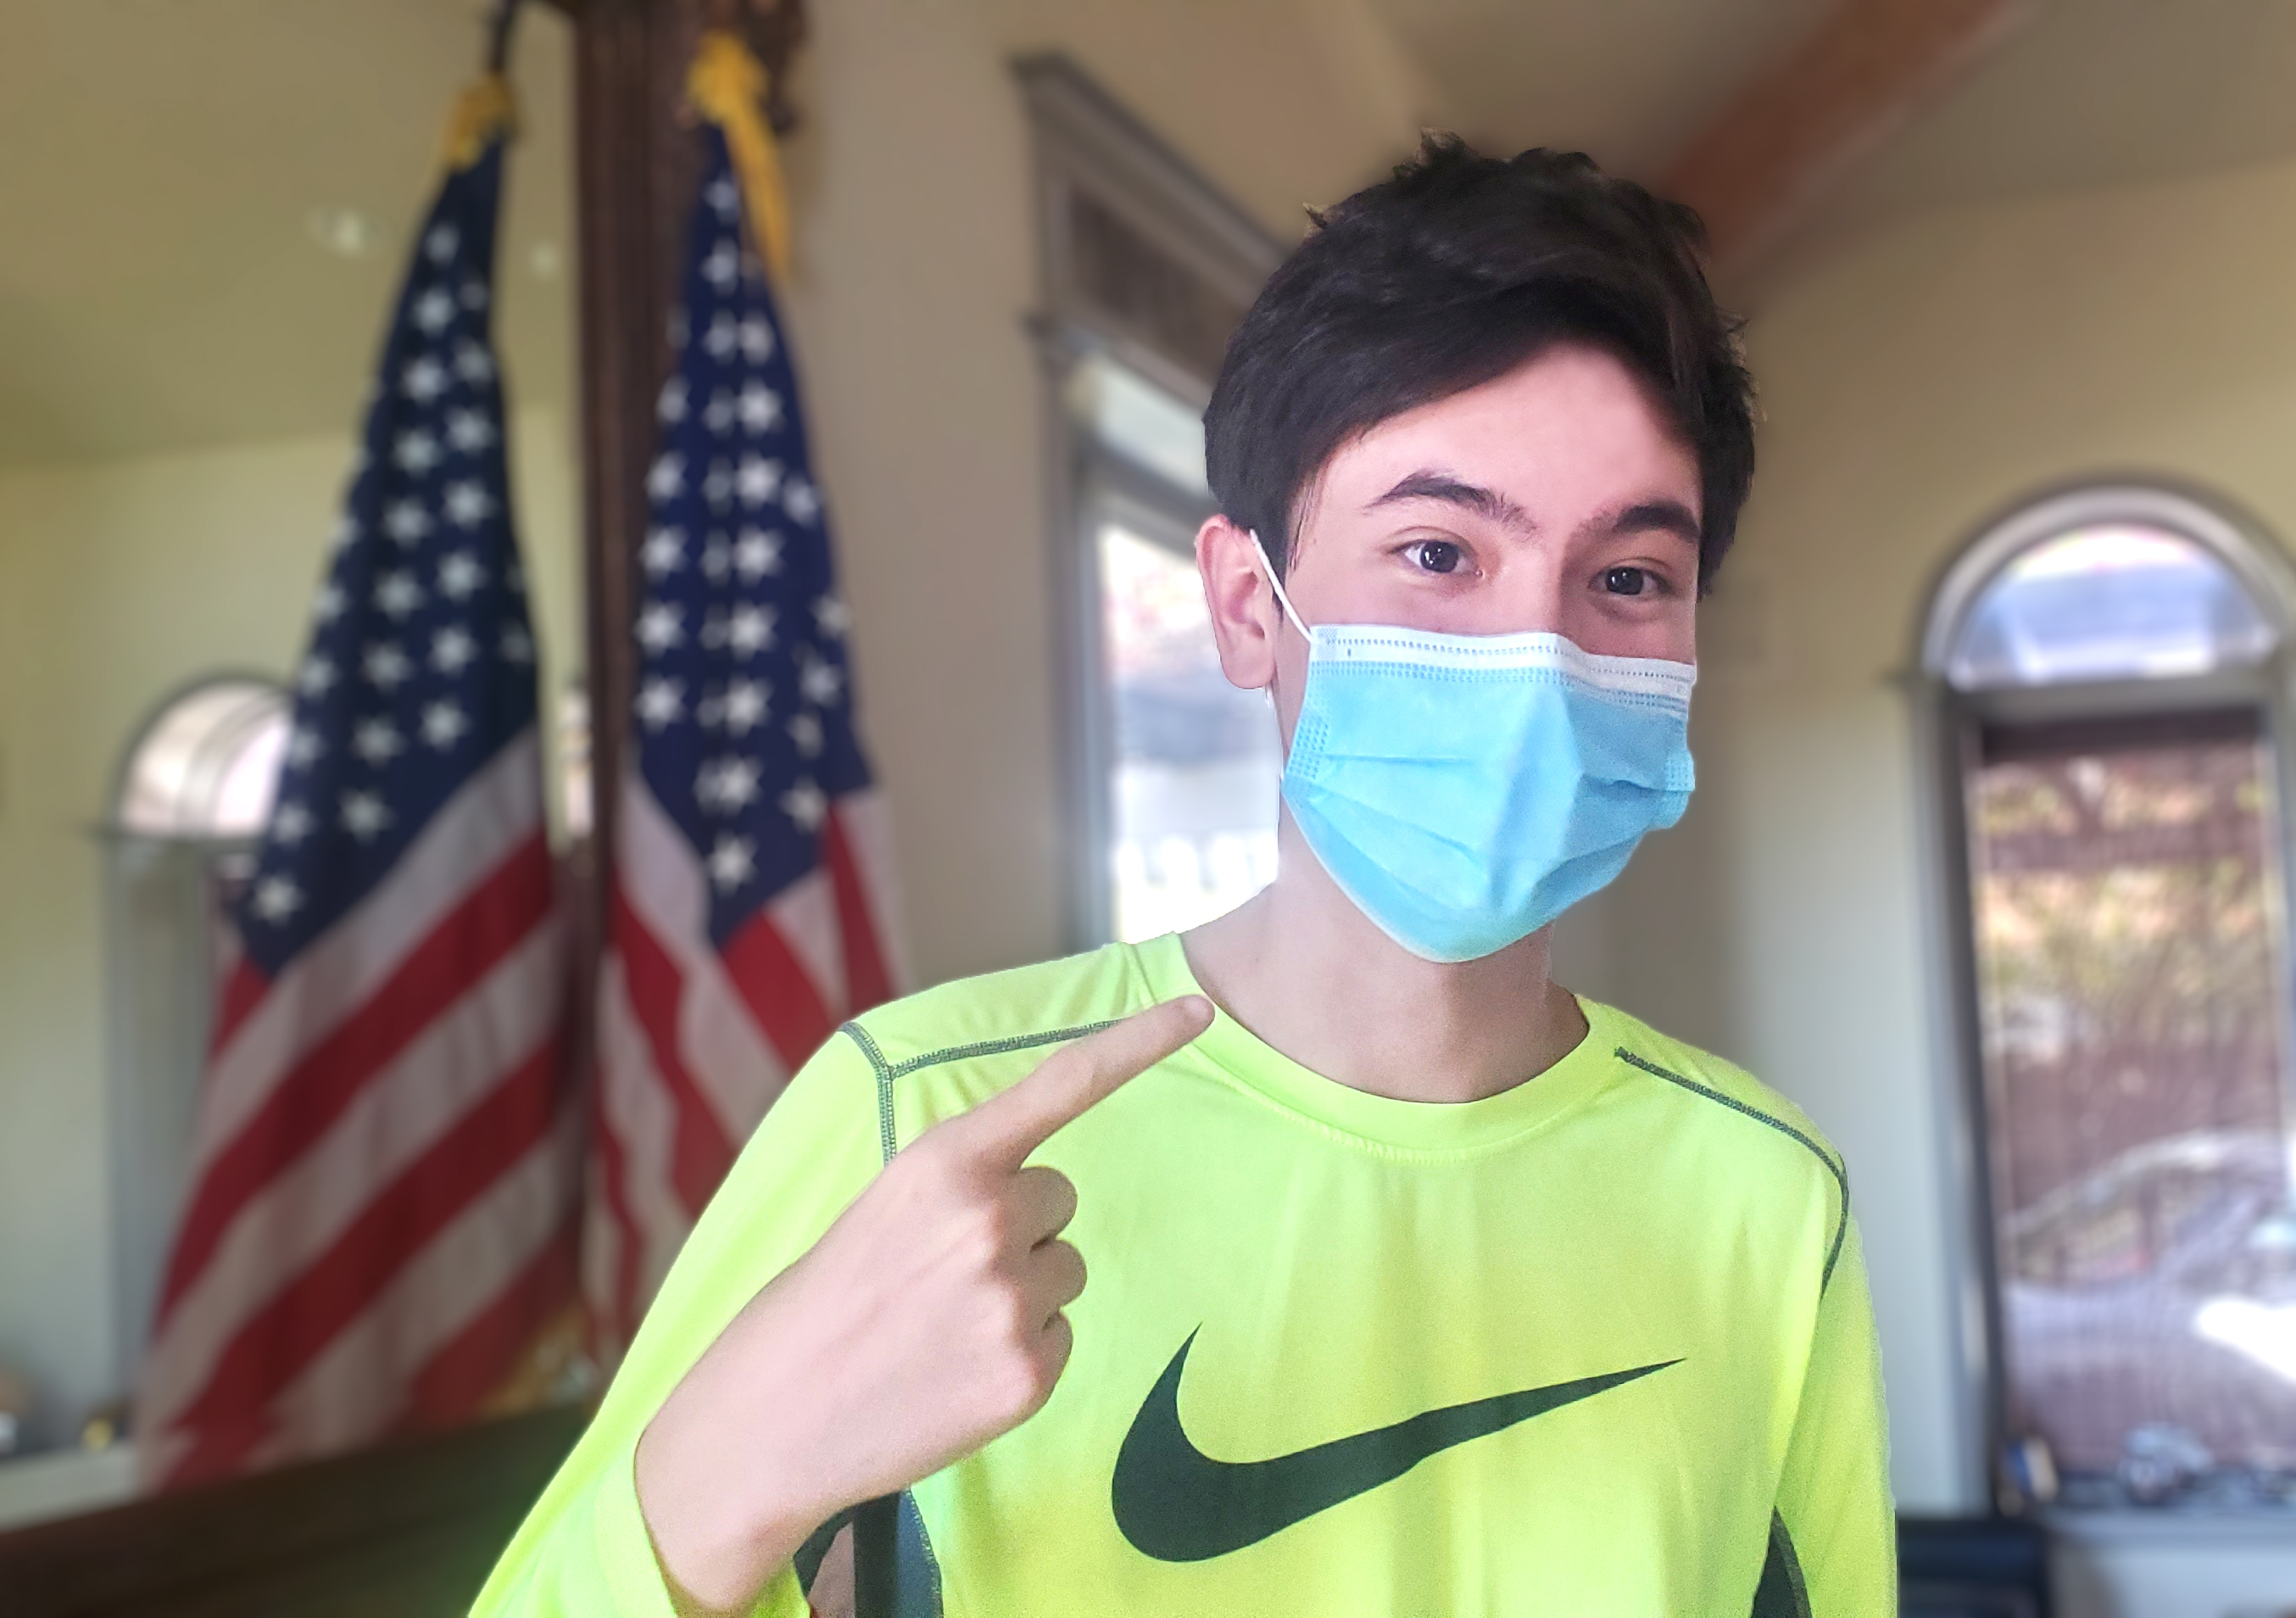 Hollywood Upcoming Teenage Talent Alex Nia Wearing Face Mask and donating children face masks